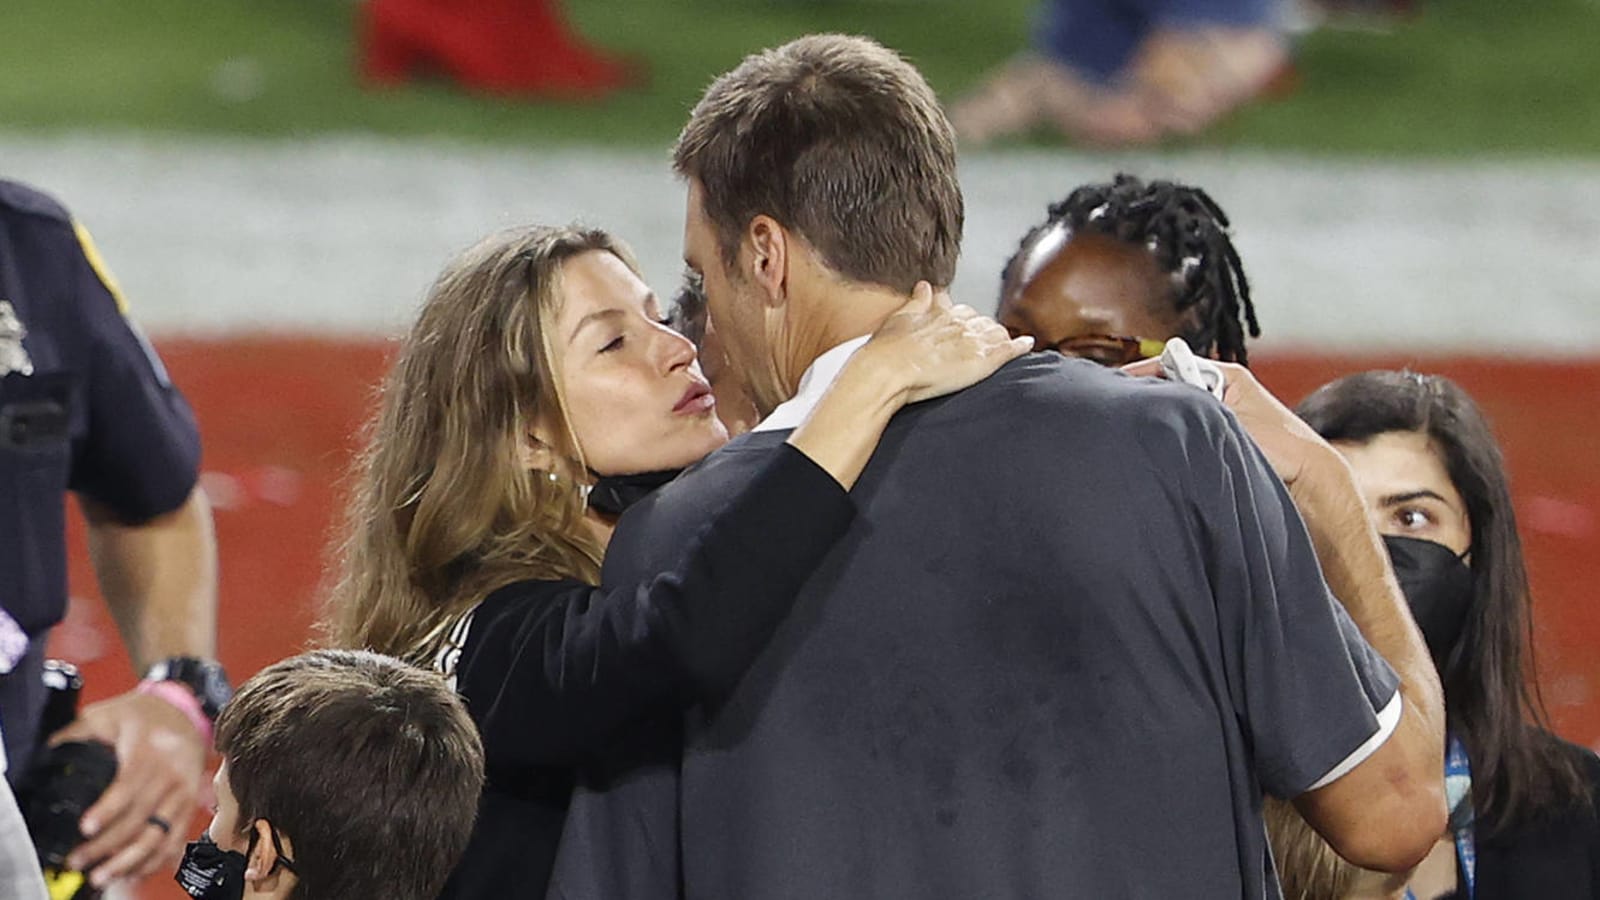 Here is what Gisele told Brady right after Super Bowl win